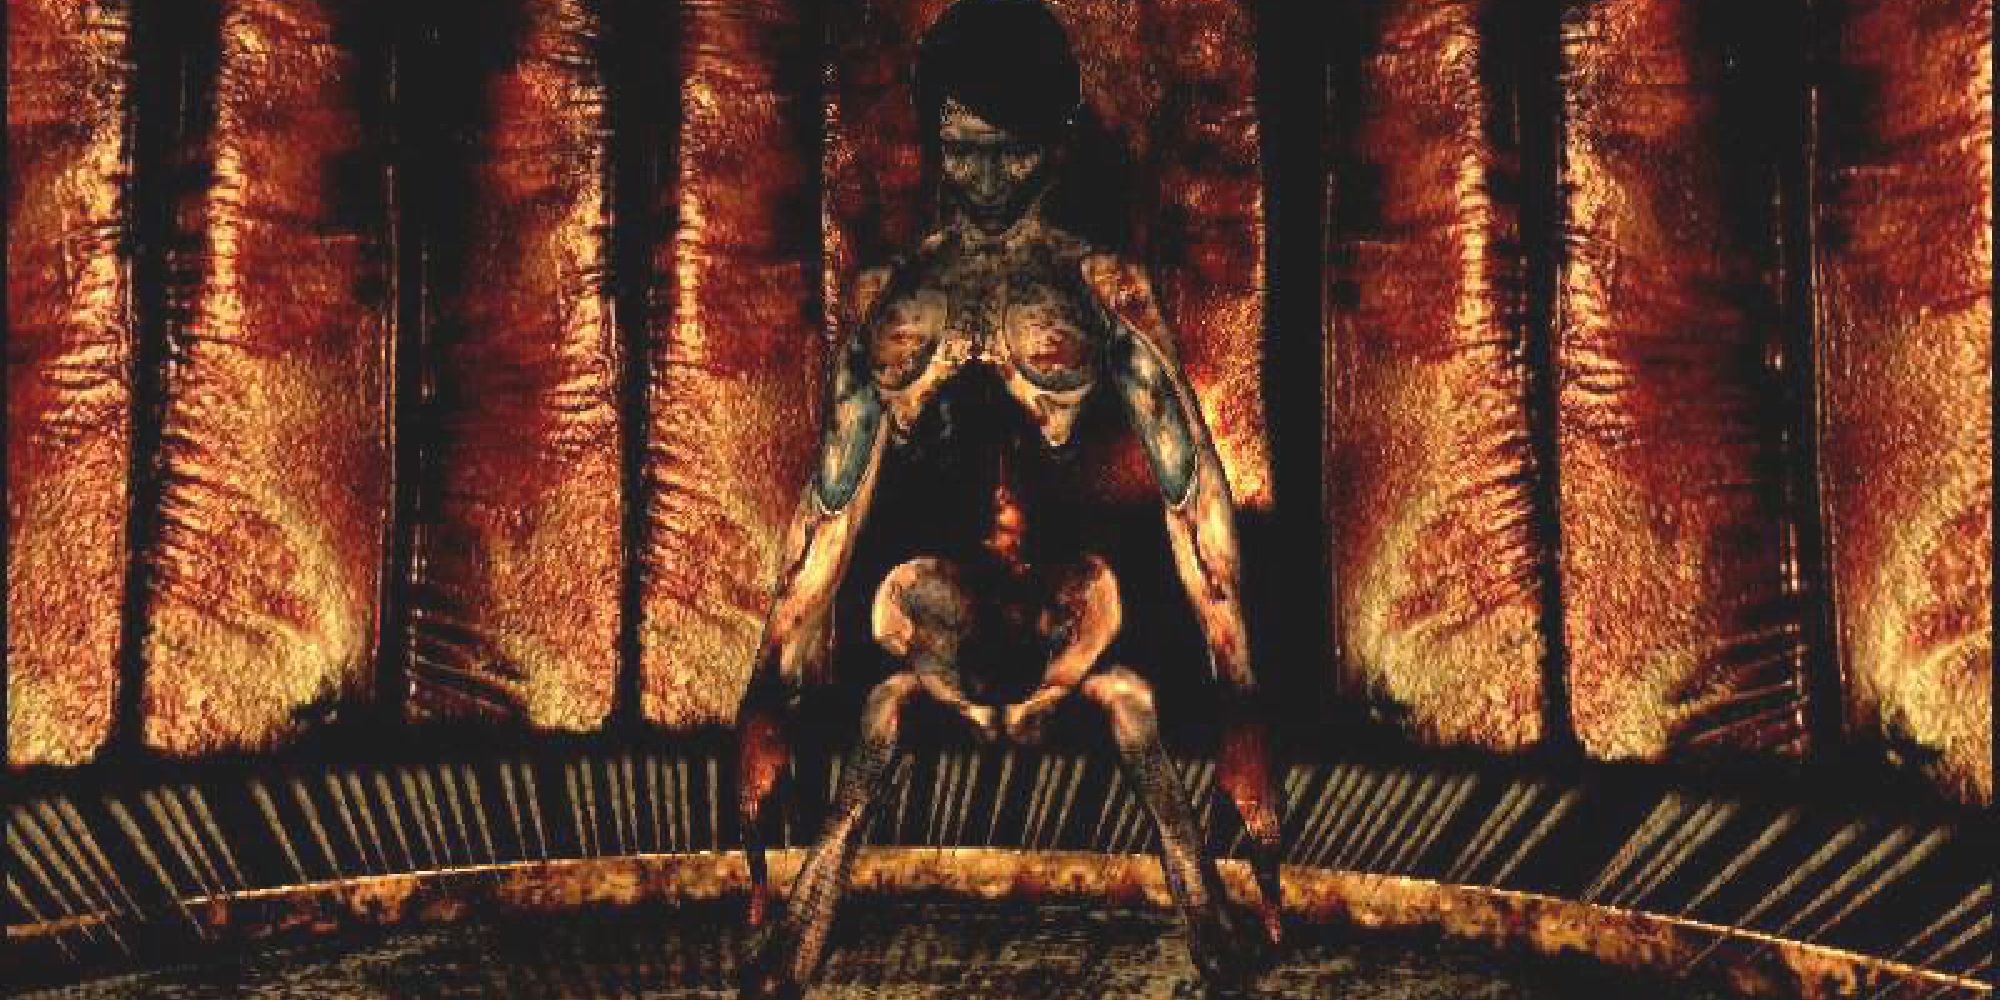 The incomplete form of God in Silent Hill 3